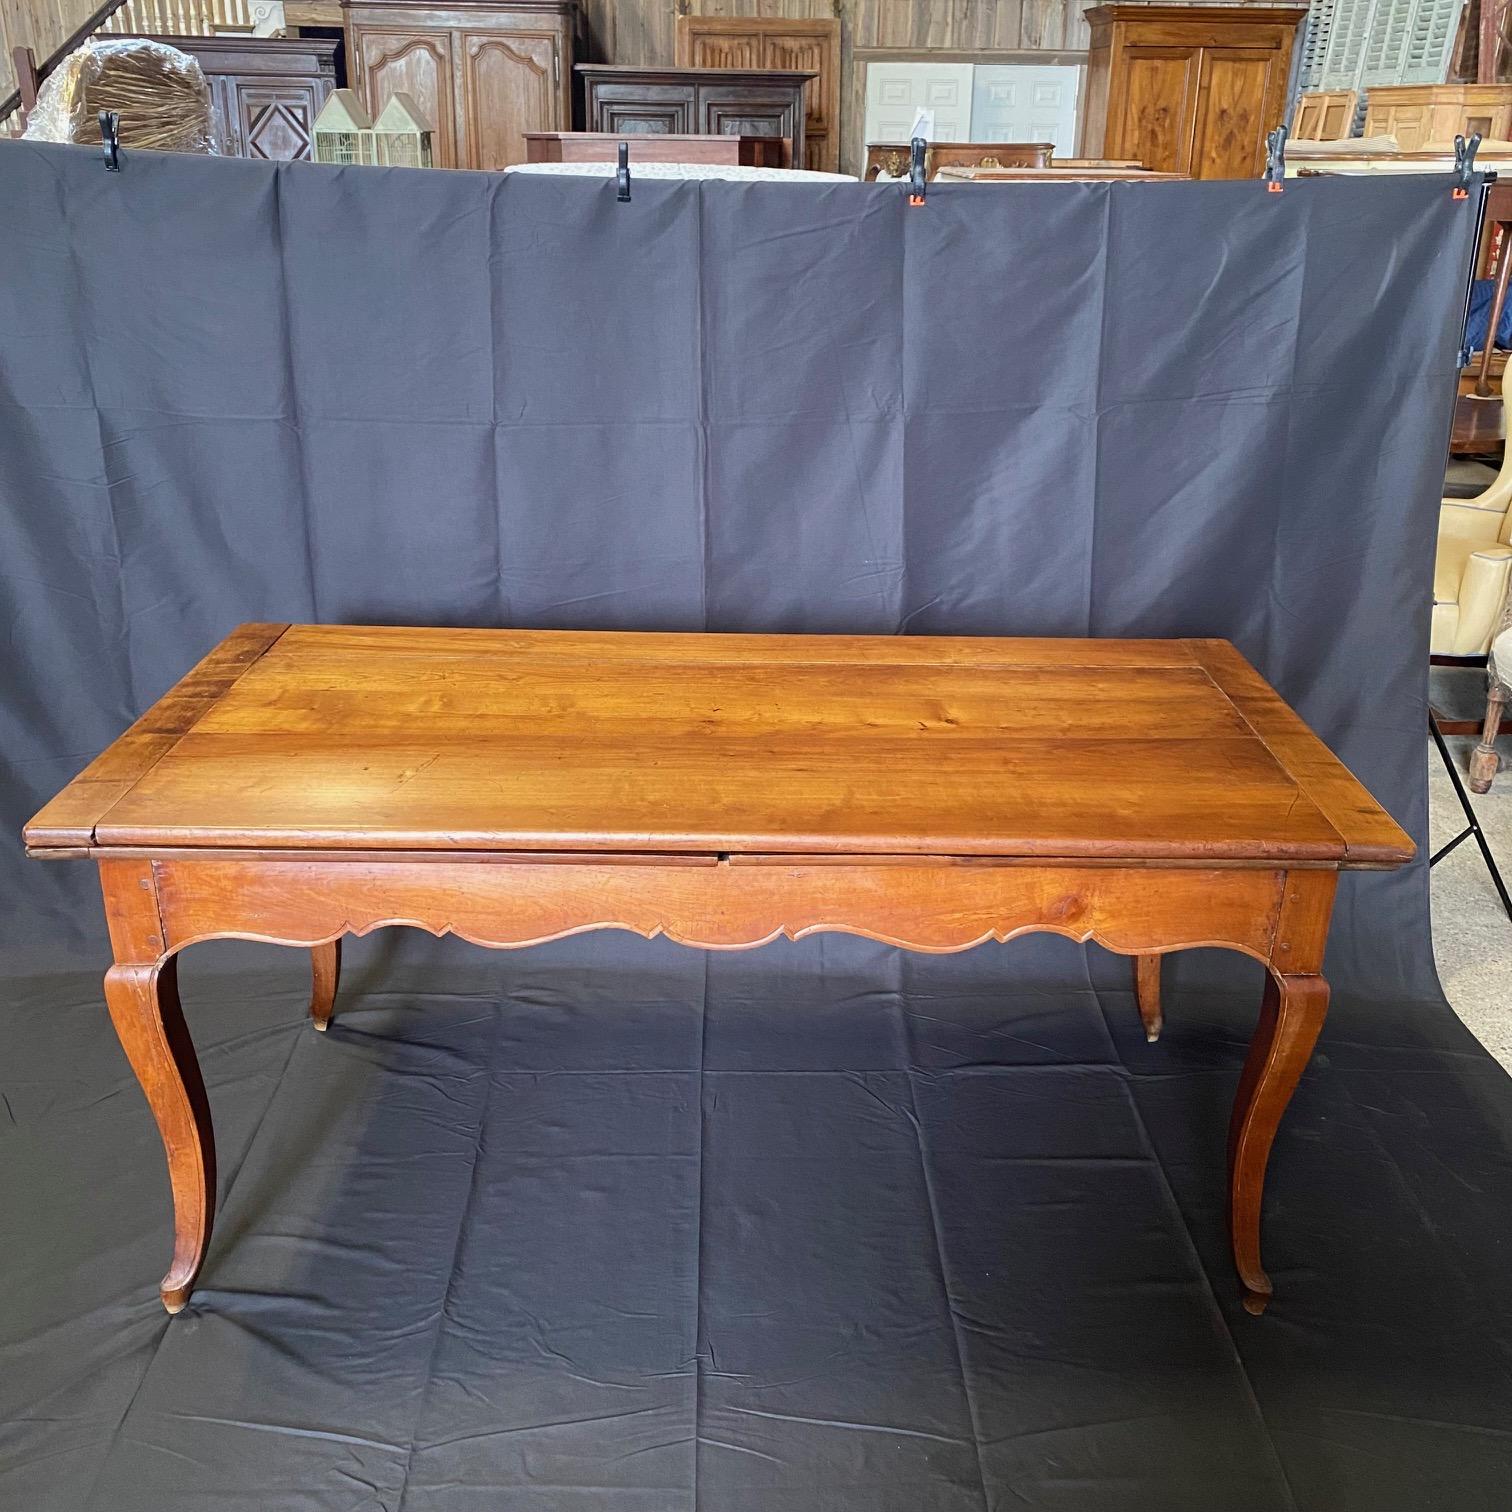 This elegant French farm dining table from Provence, France features two built in leaves, gracefully curved legs and a beautifully carved, scalloped apron. When closed, the table is 67 1/4  inches in length but can extend to just over 11 feet when